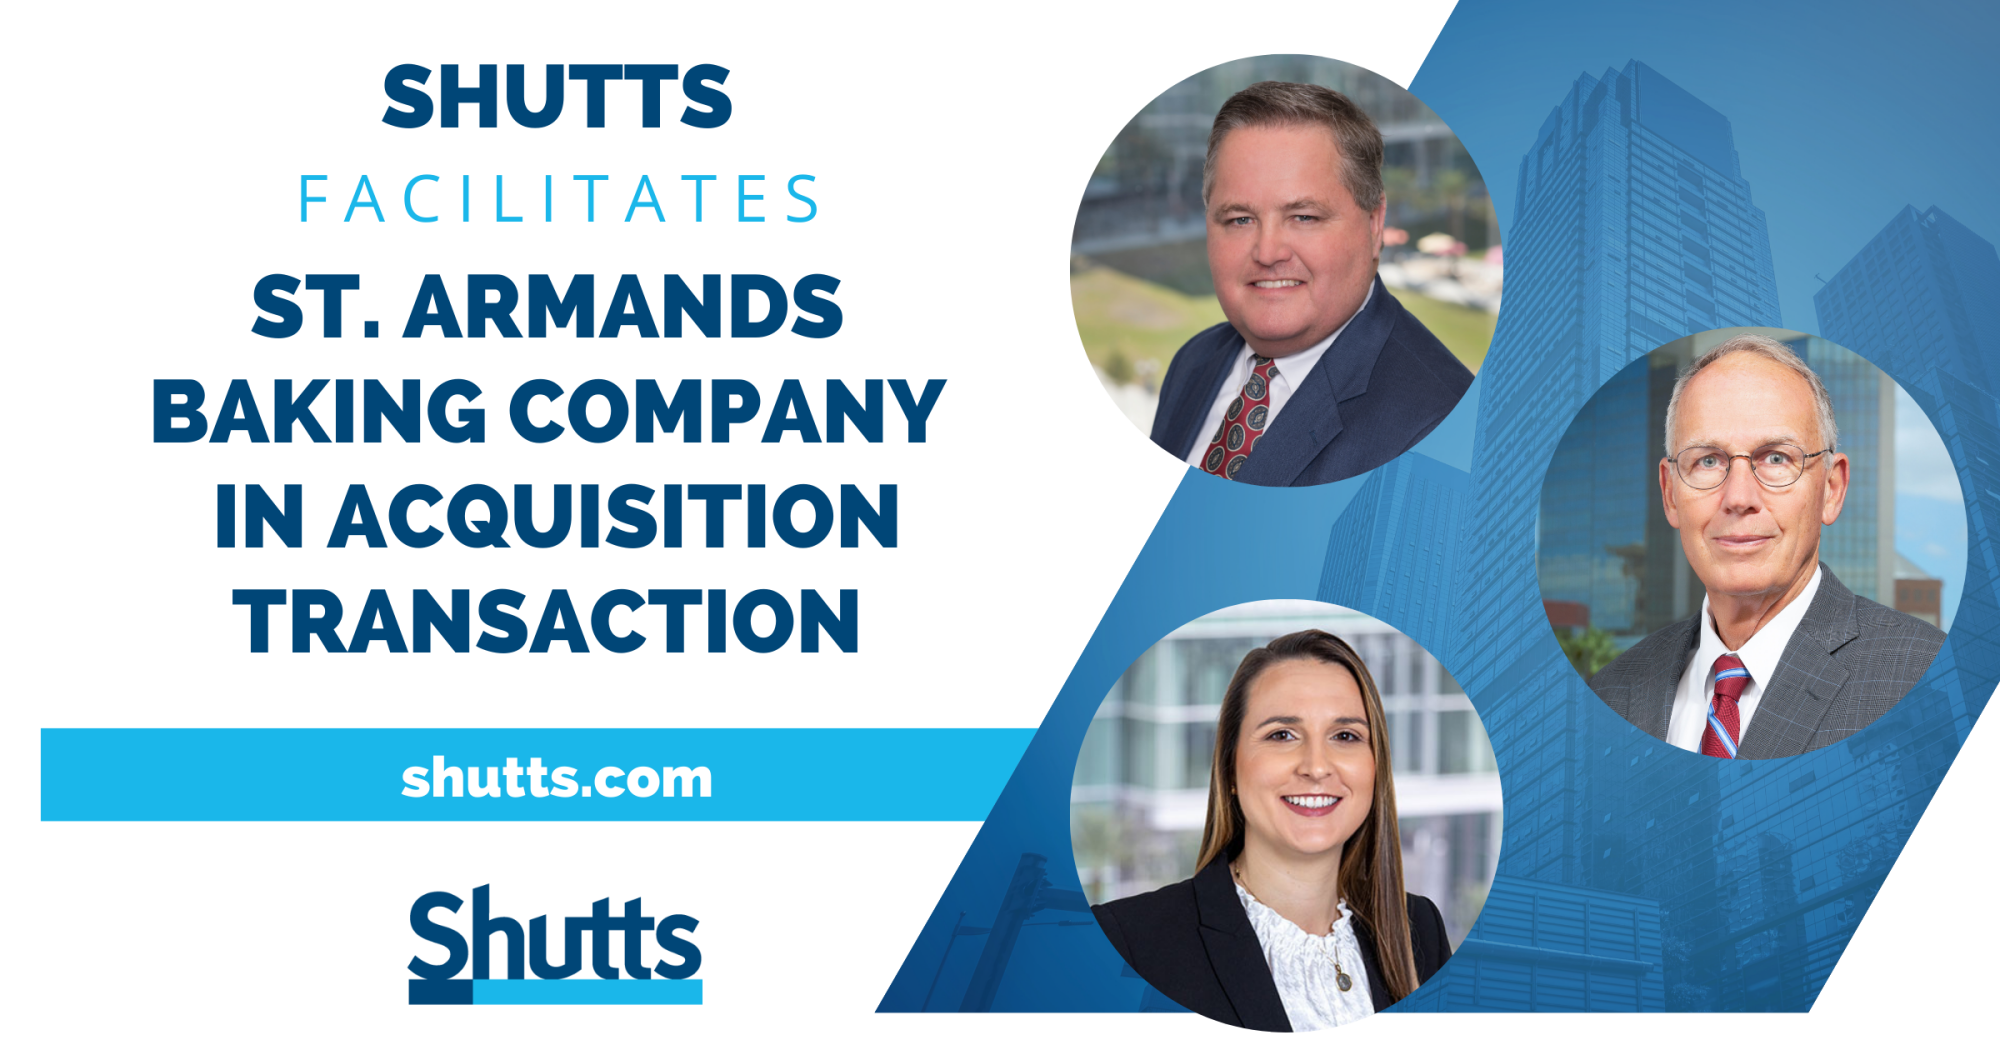 Shutts Facilitates St. Armands Baking Company in Acquisition Transaction 